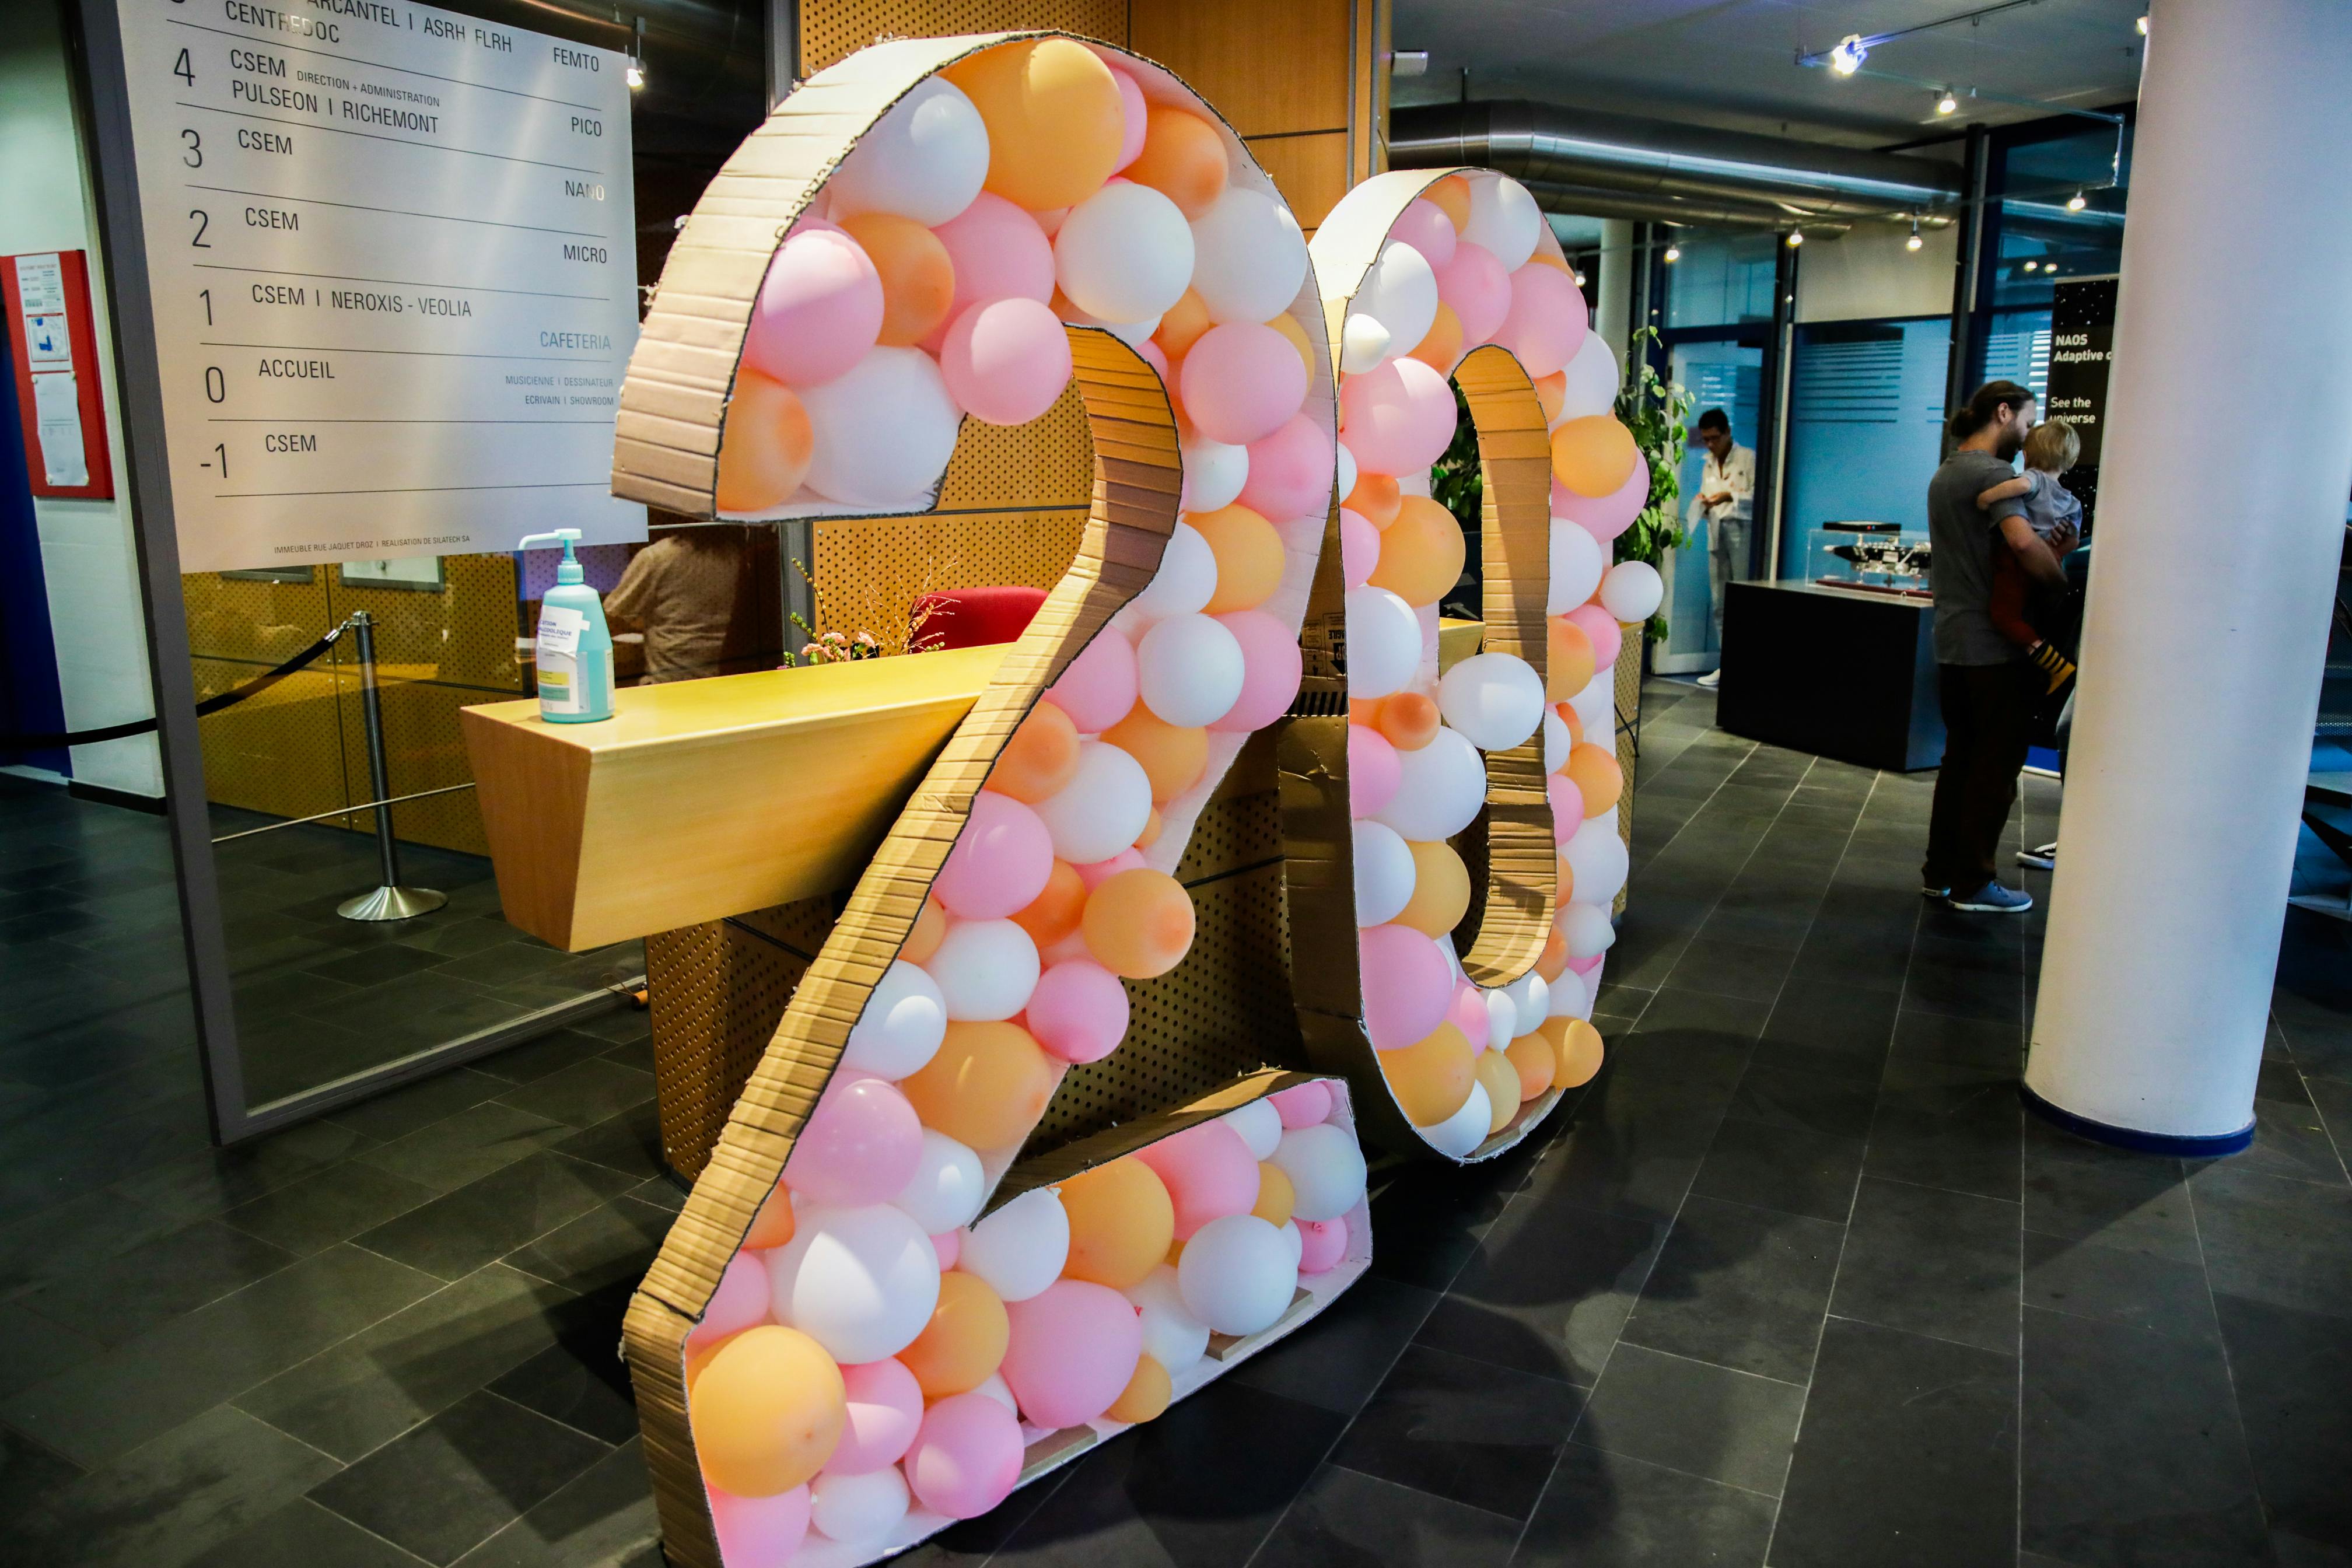 A large 20 number made from balloons